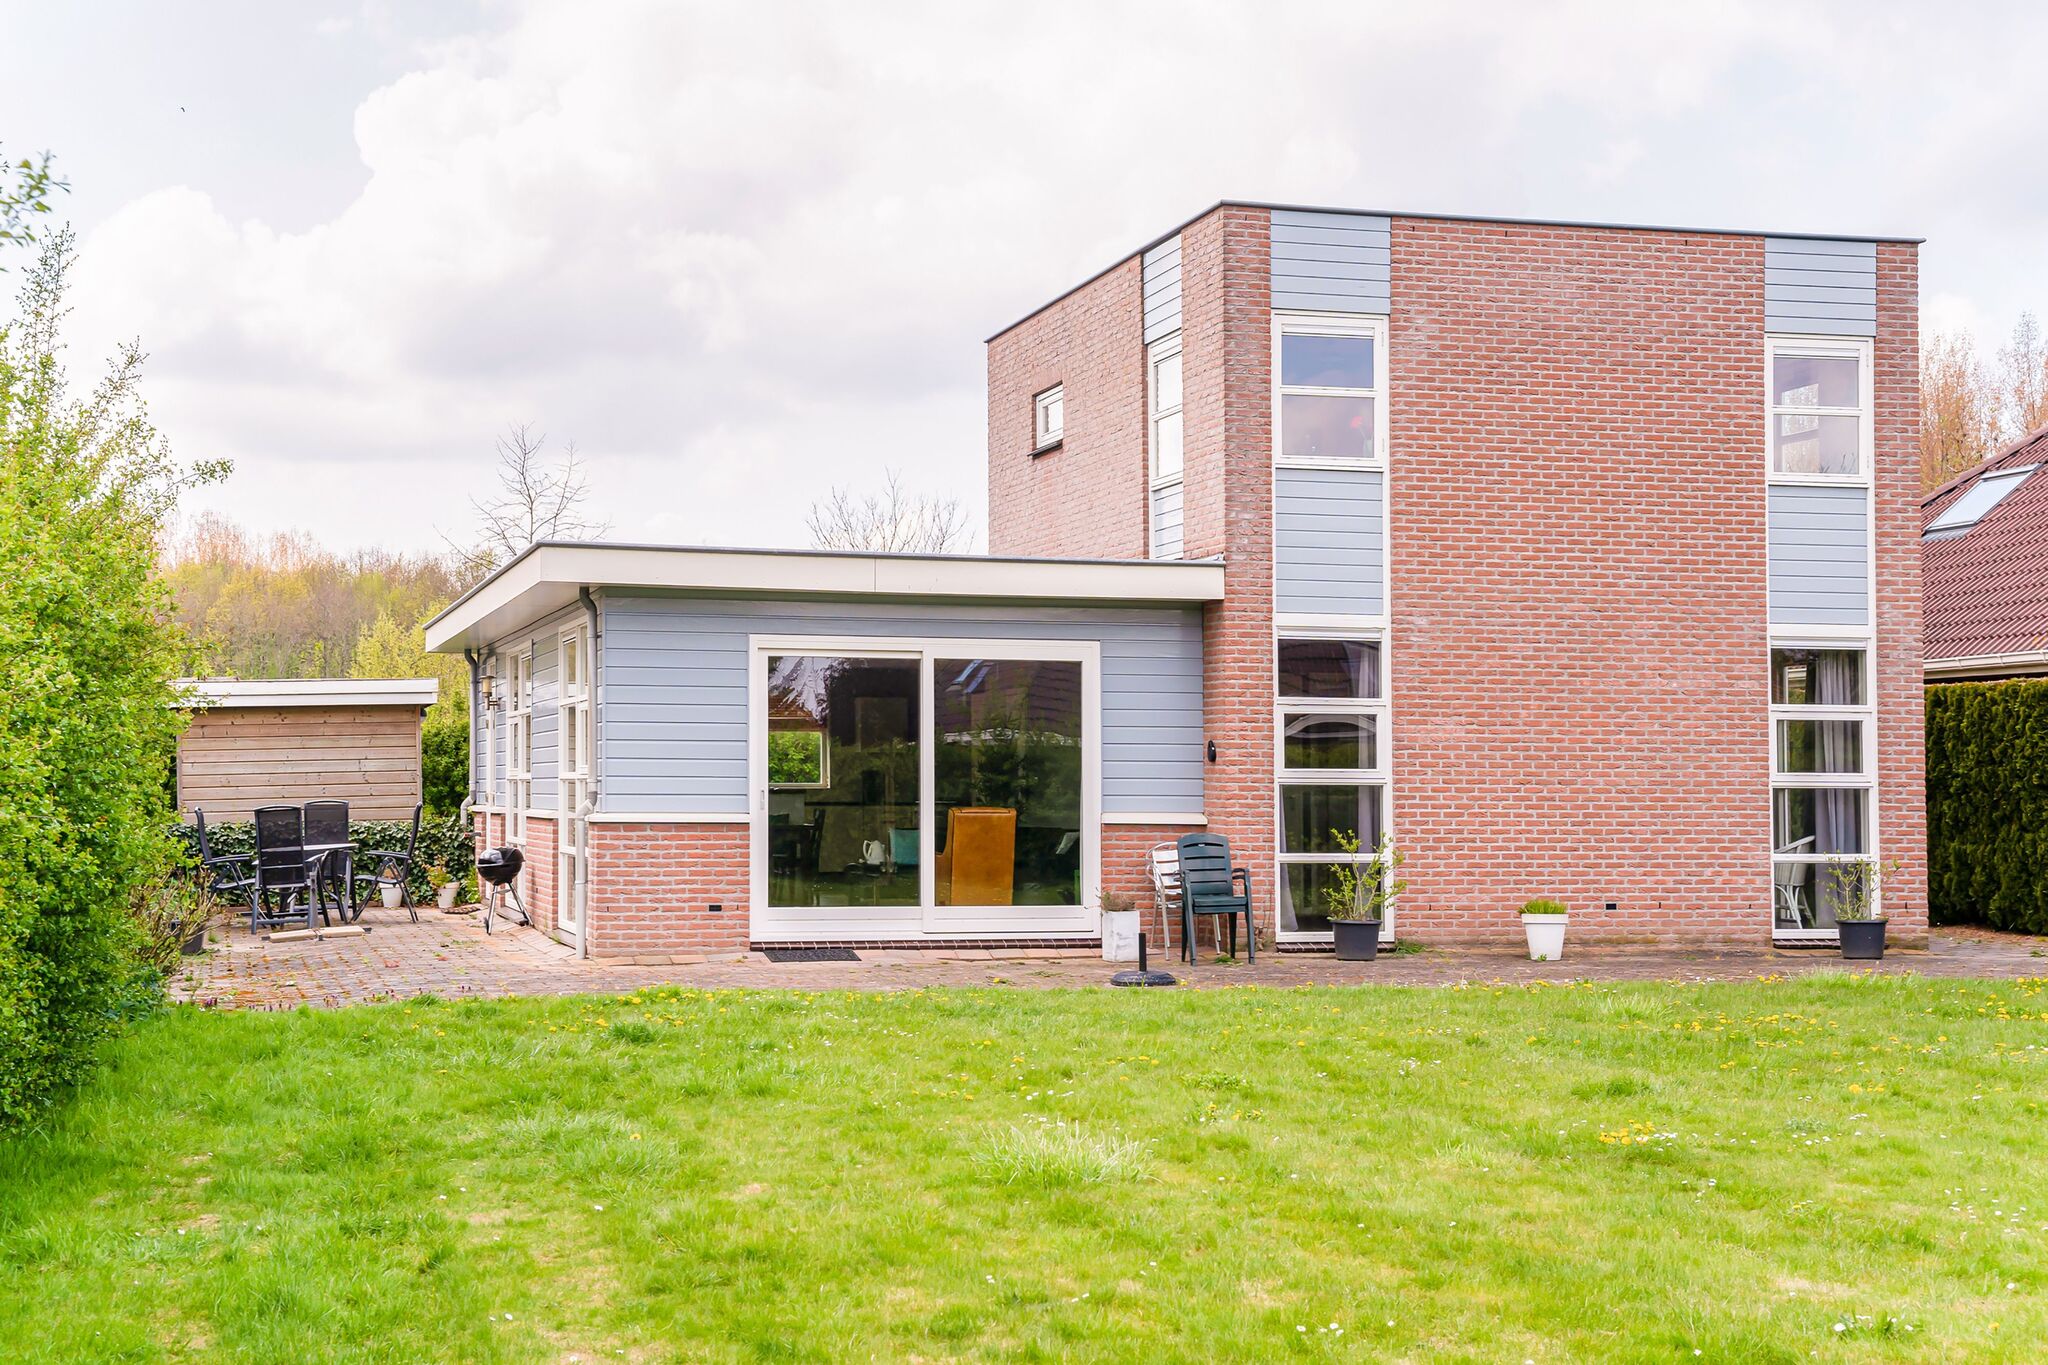 Lovely holiday home in Zeewolde with a swimming pool